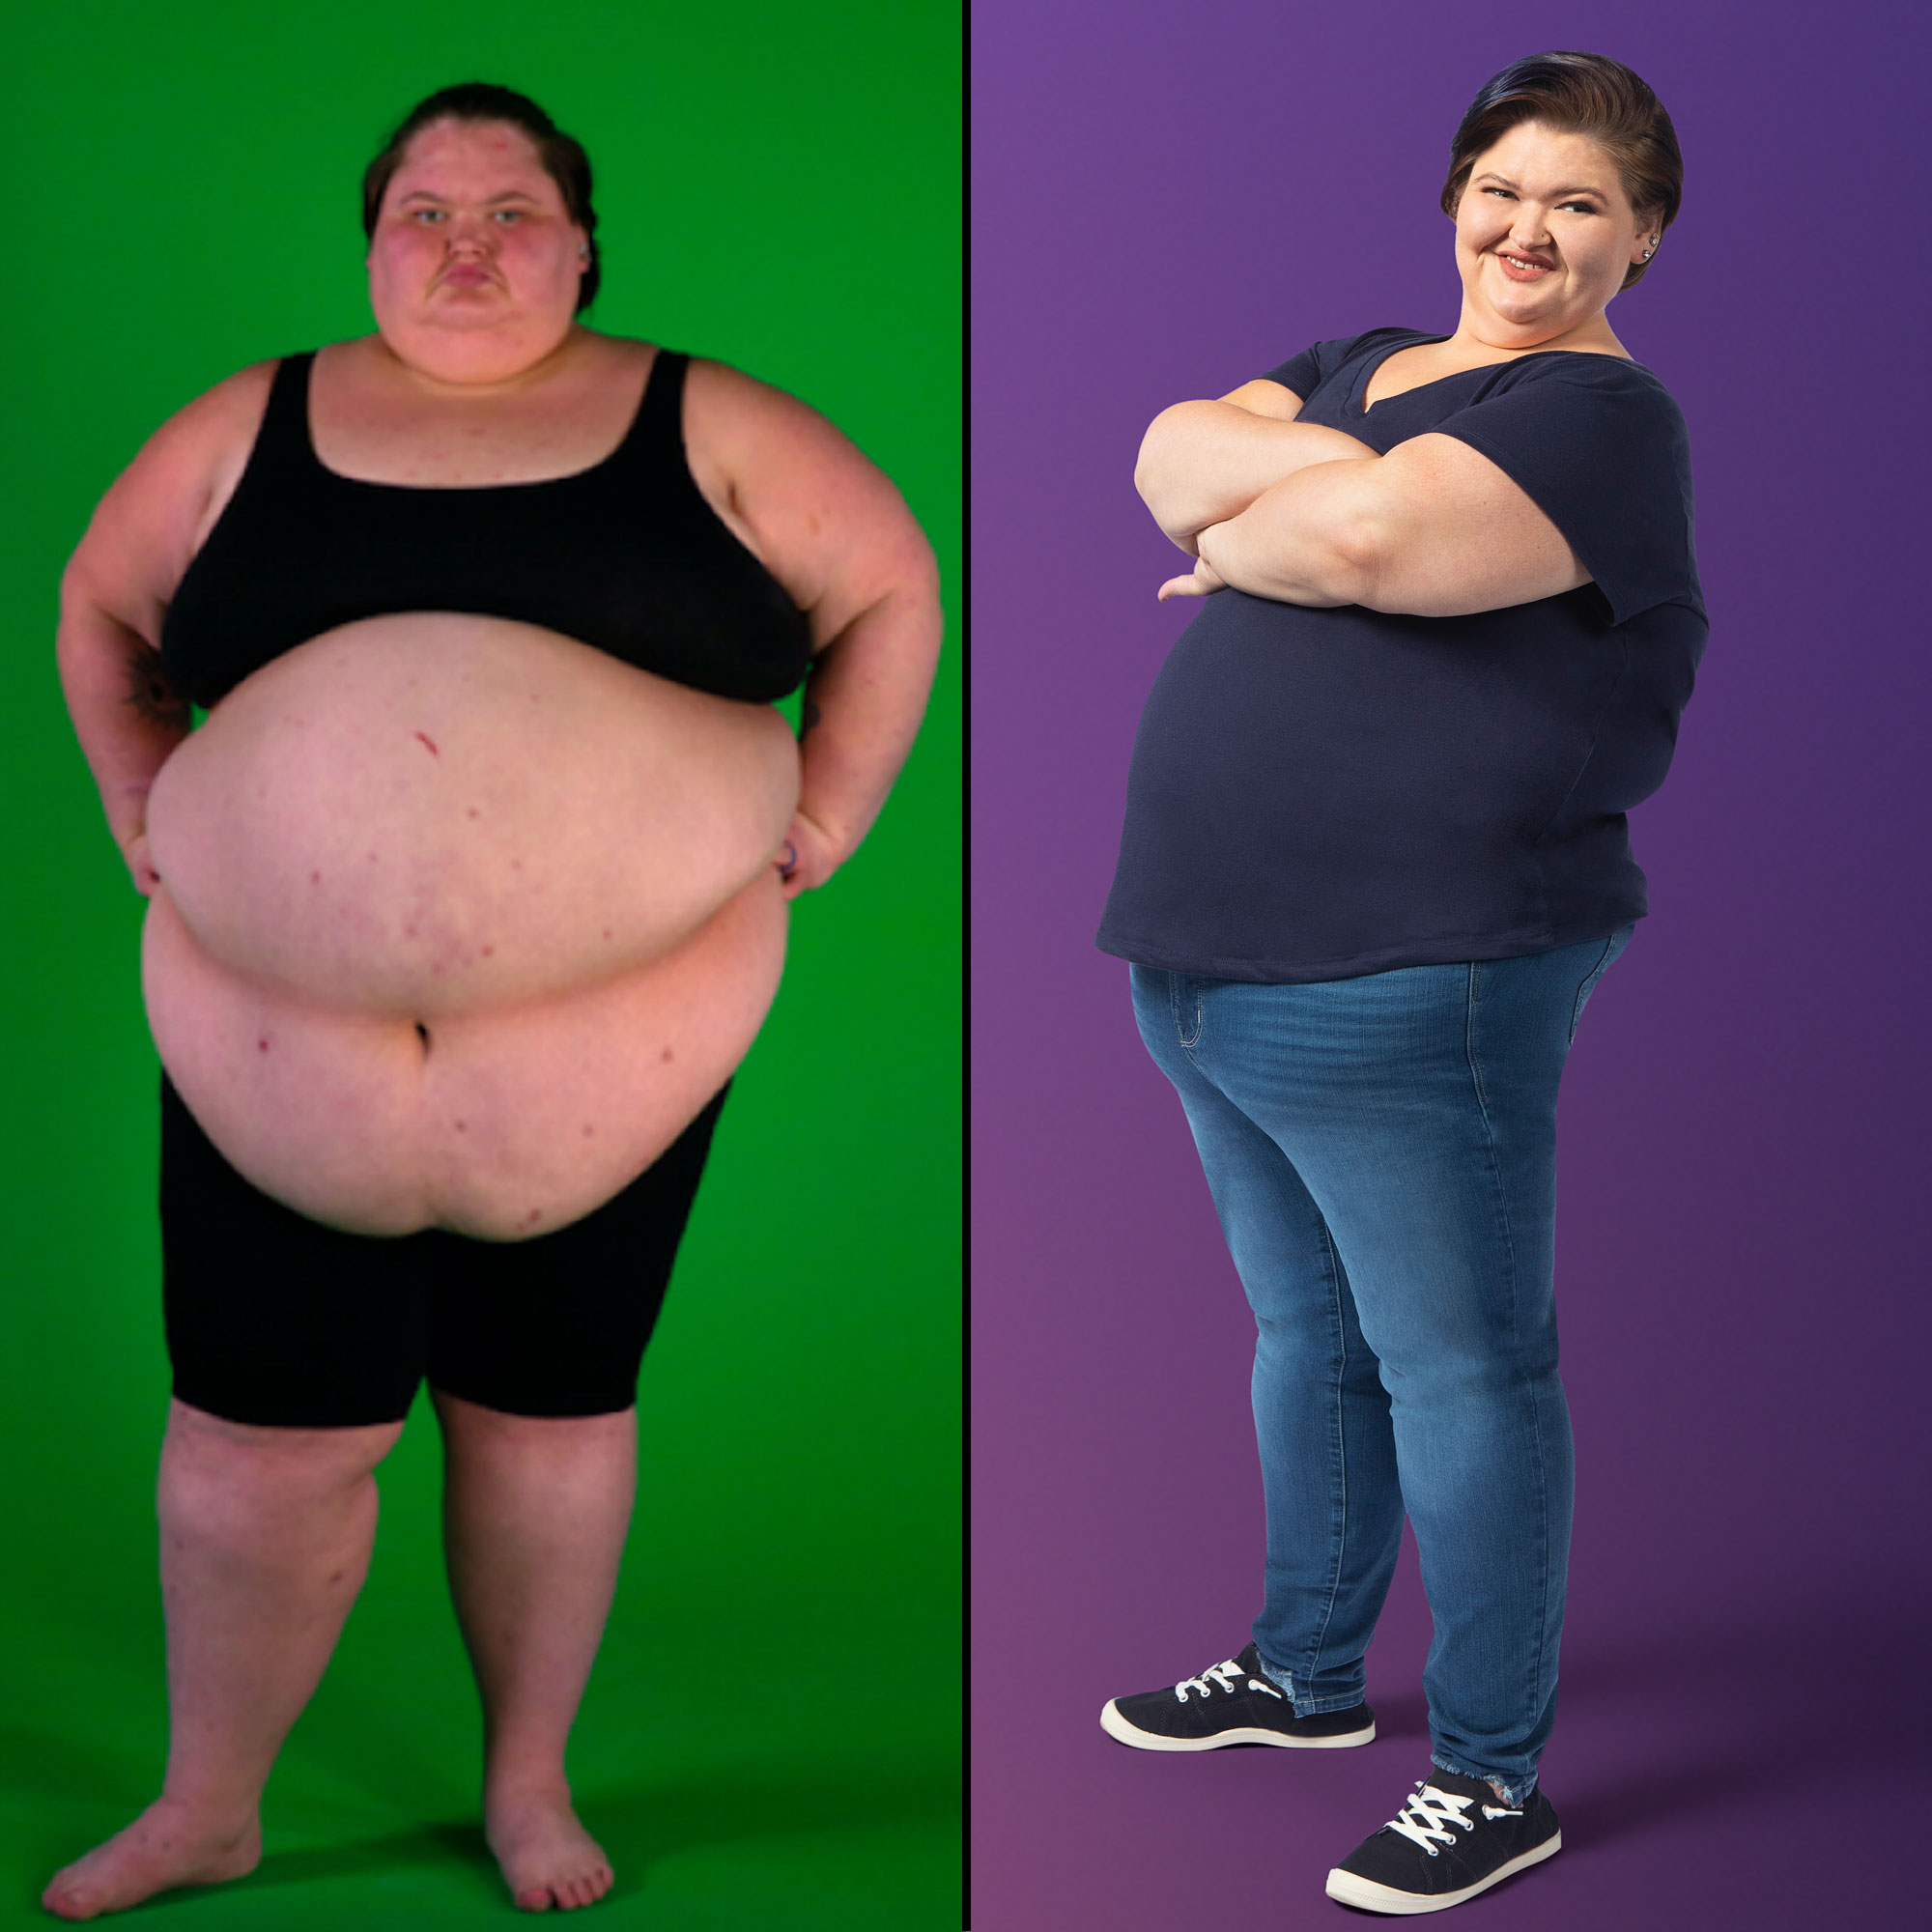 1000-Lb. Sisters' Amy Slaton's Weight Loss: Before, After Photos